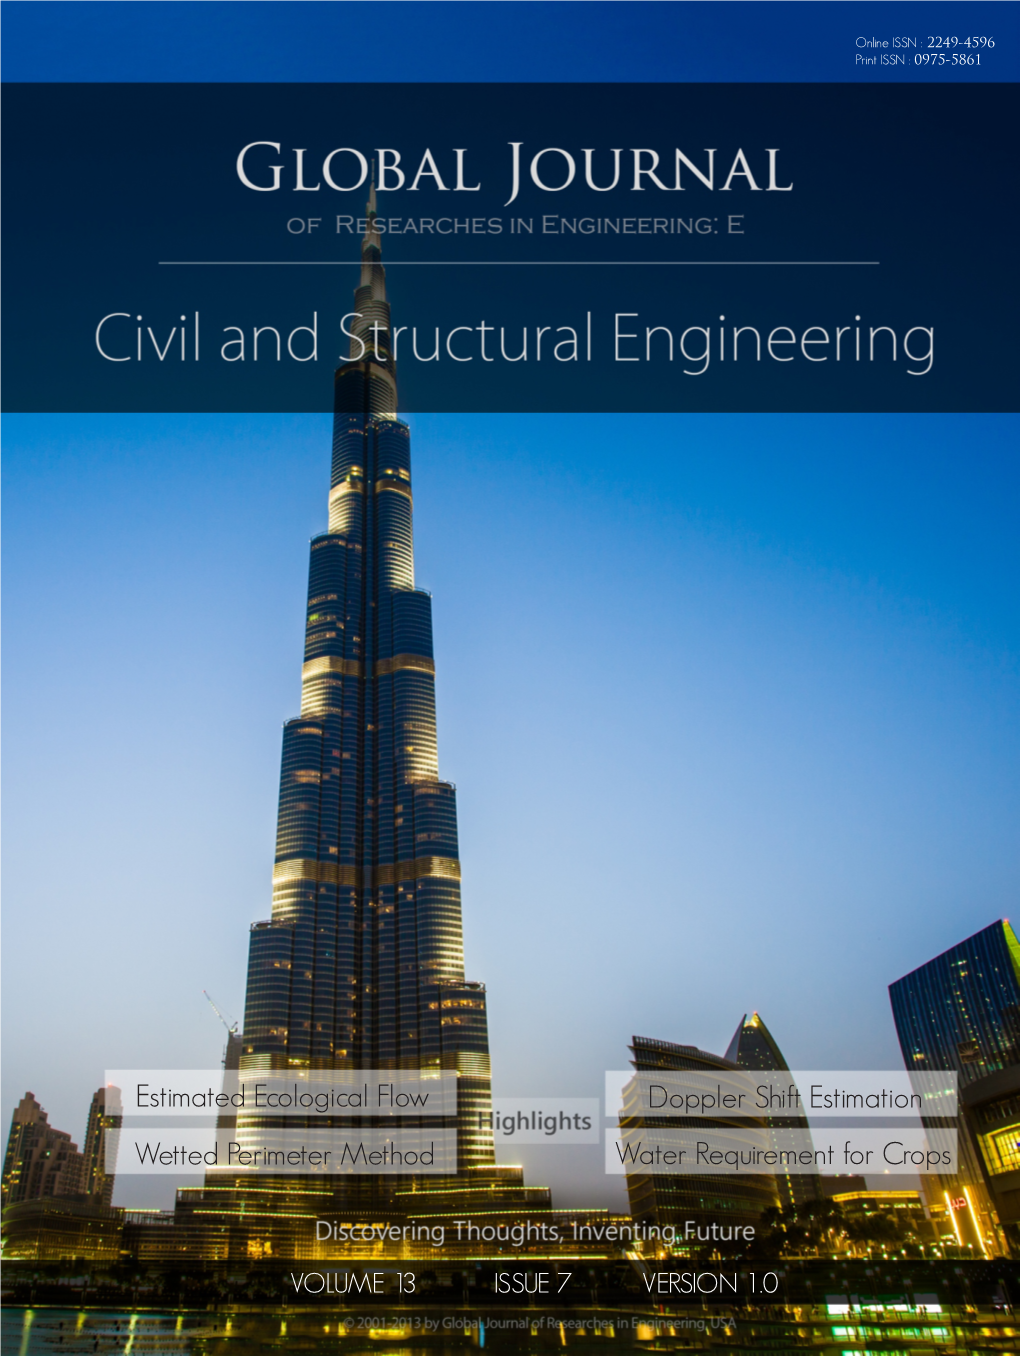 Global Journal of Research in Engineering